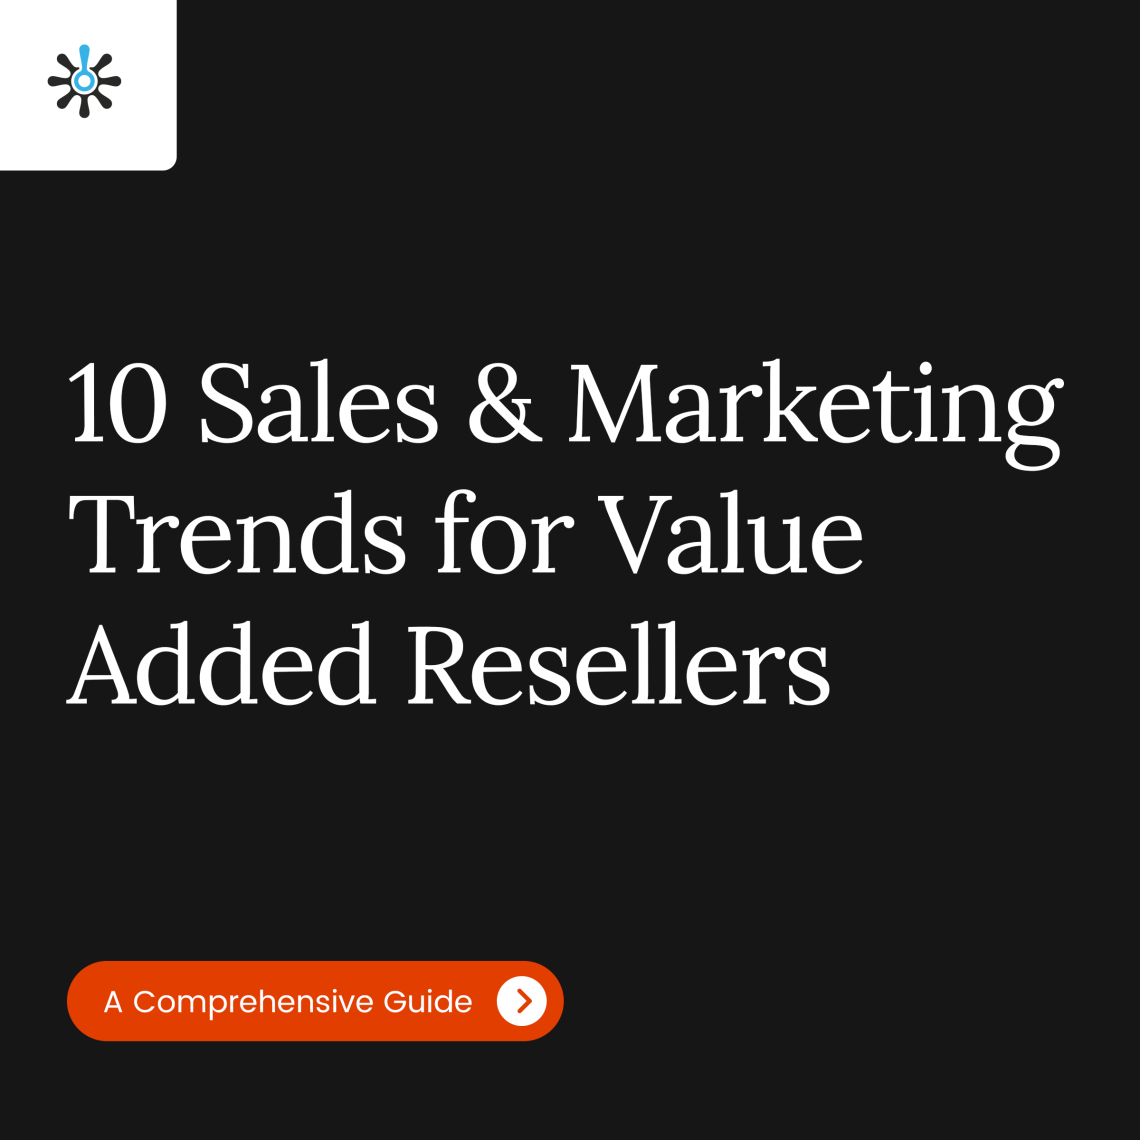 Title Page Reading "10 Sales & Marketing Trends for Value Added Resellers"